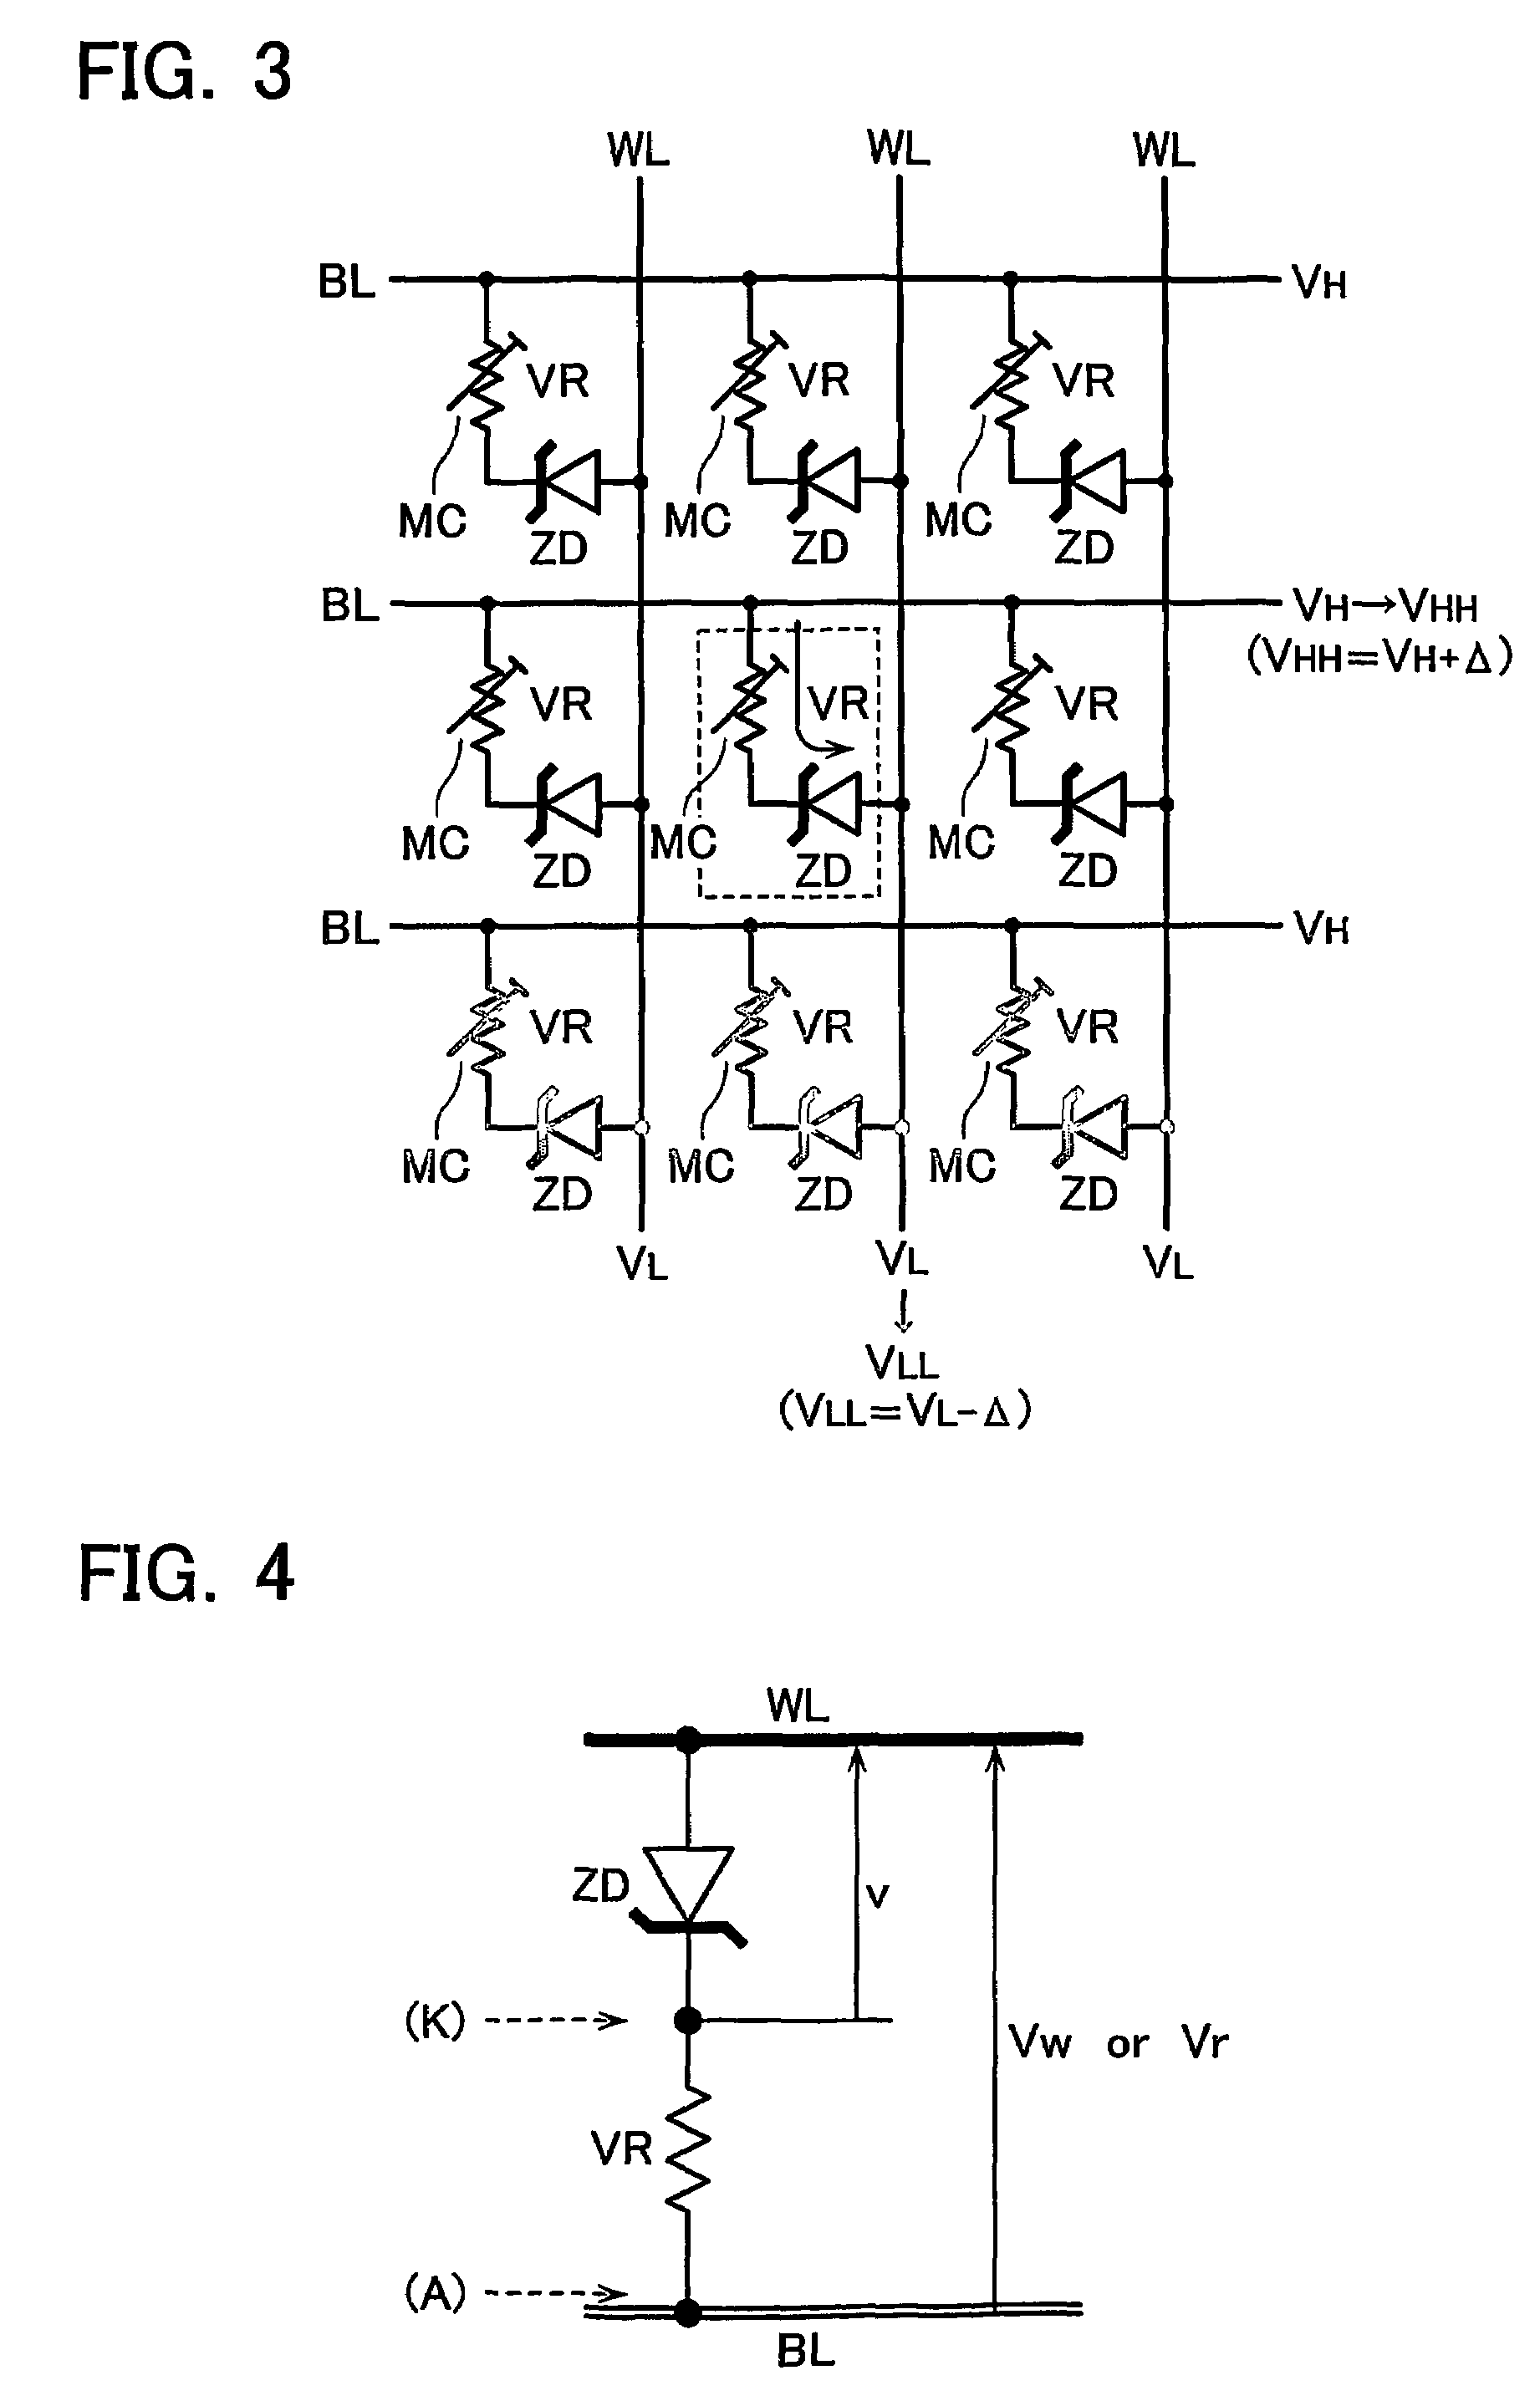 Three-dimensional programmable resistance memory device with a read/write circuit stacked under a memory cell array